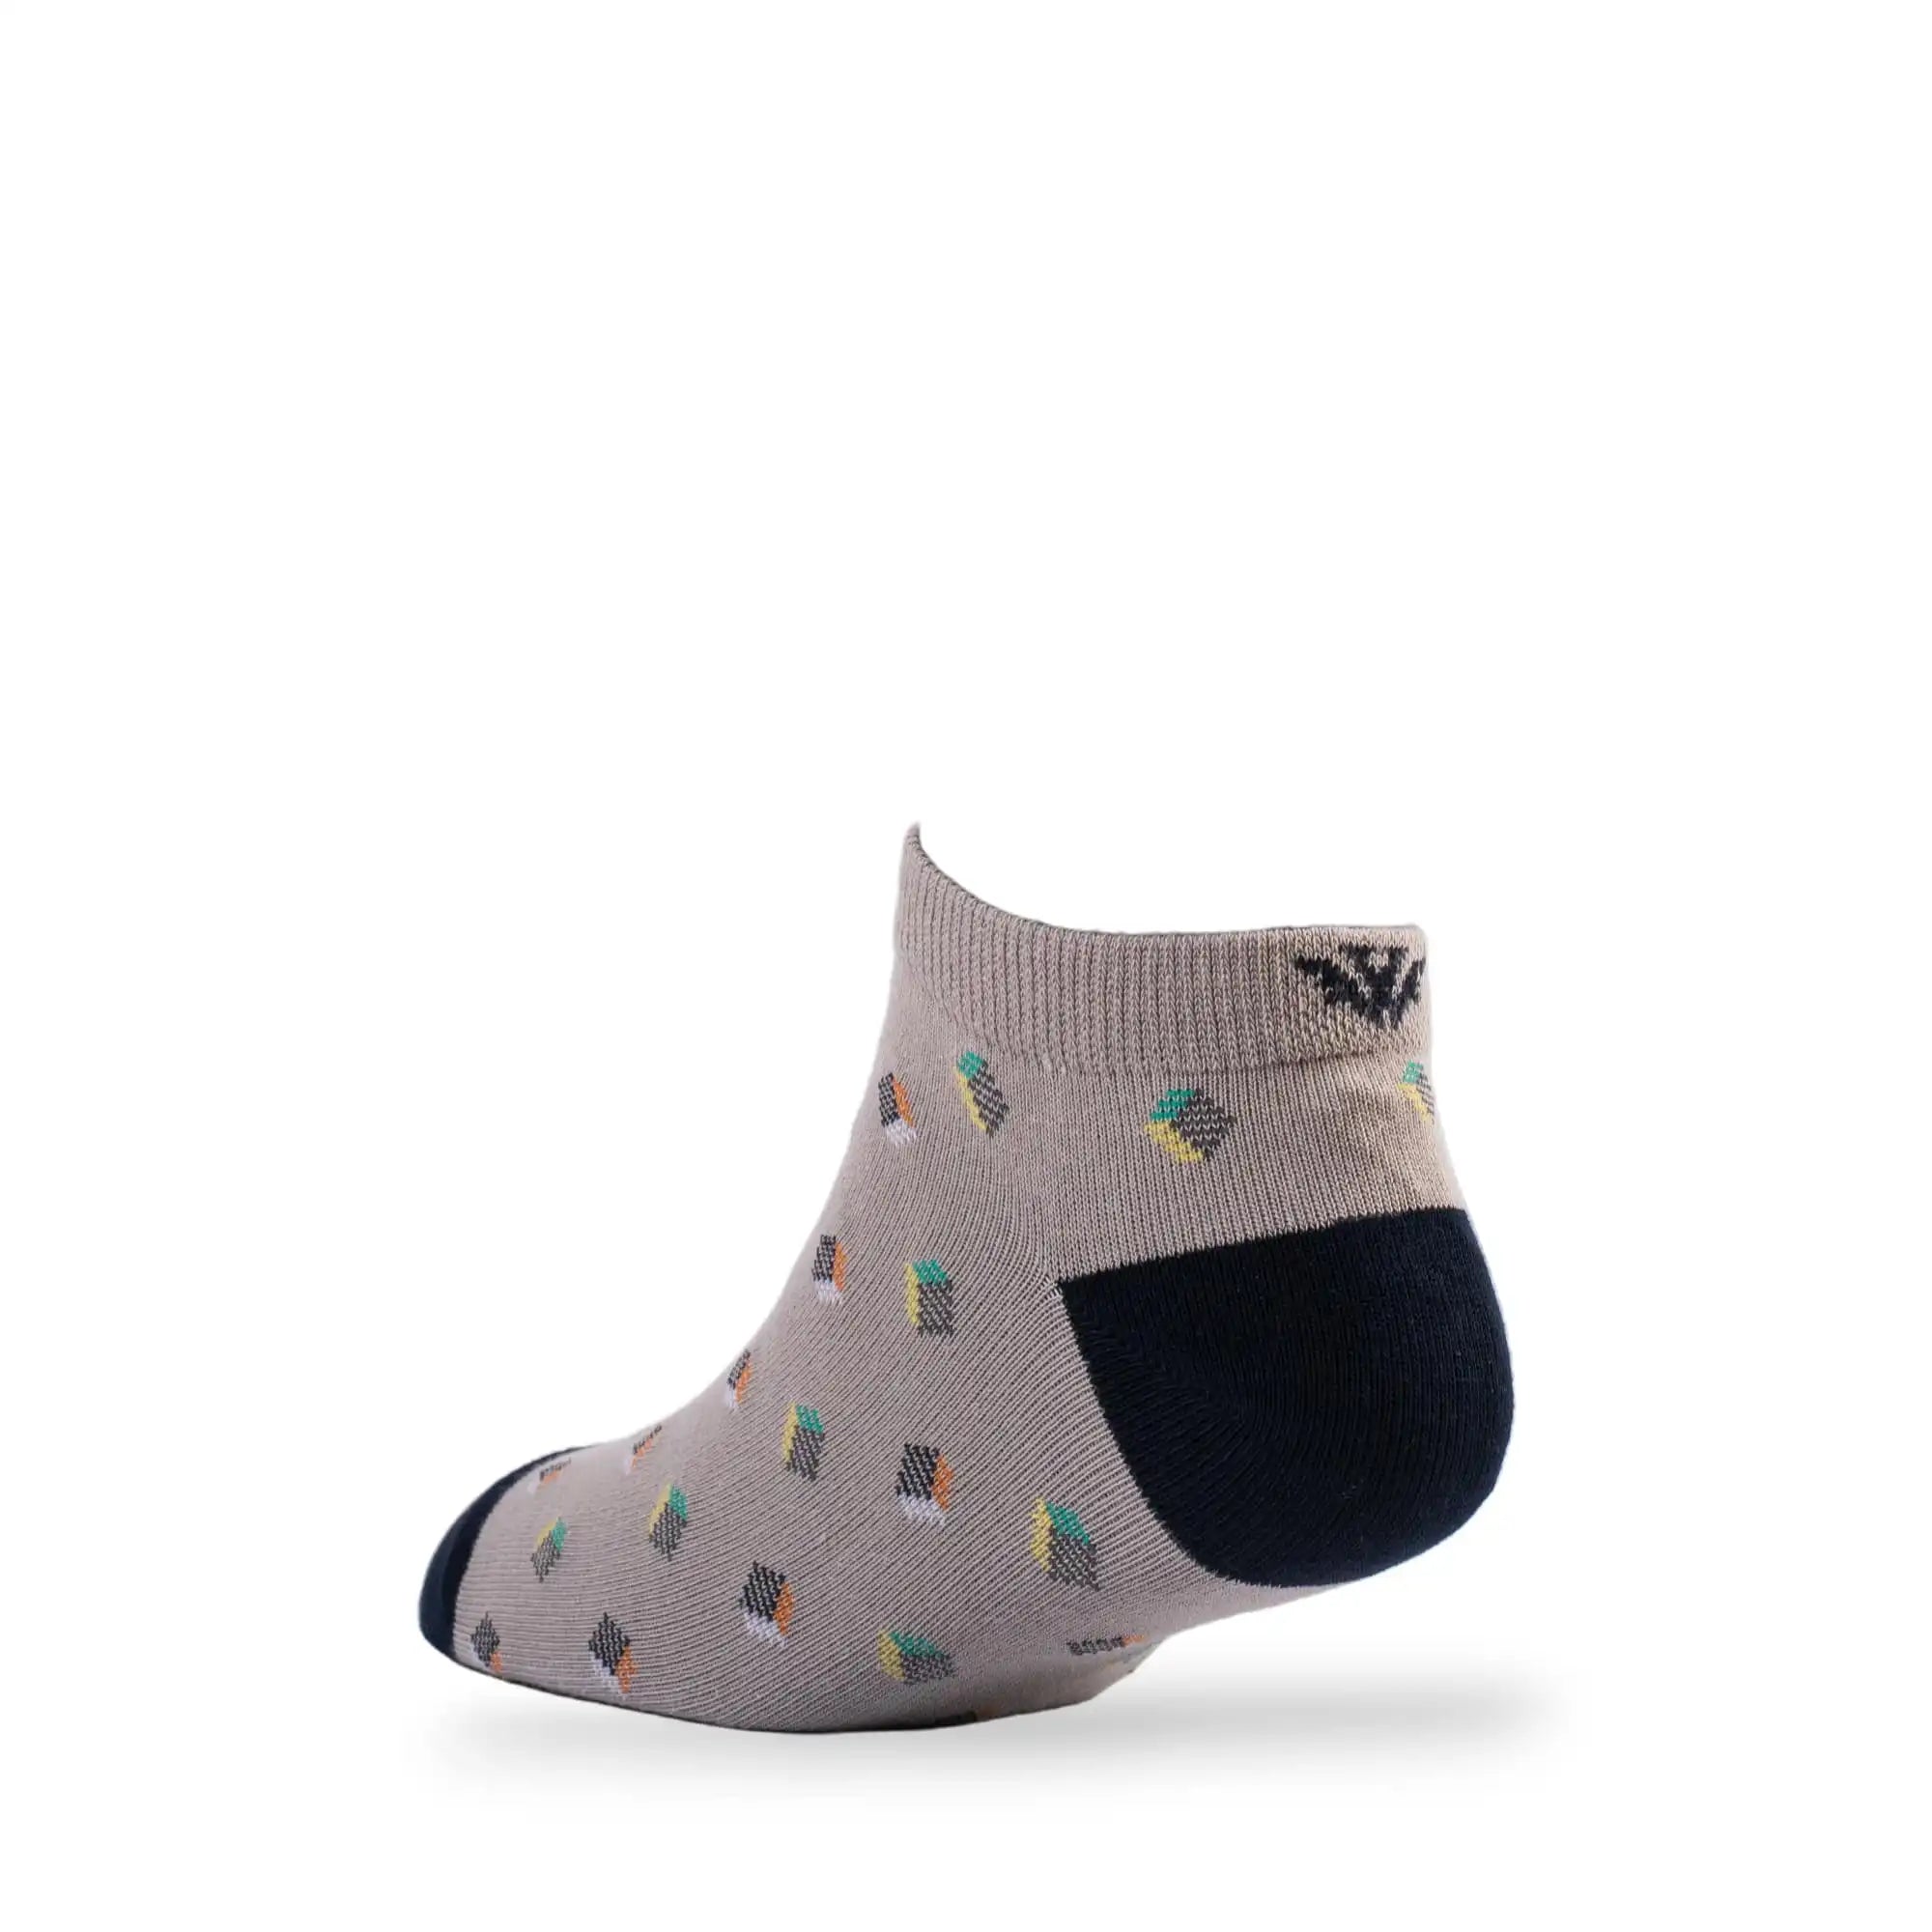 Young Wings Men's Multi Colour Cotton Fabric Design Low Ankle Length Socks - Pack of 5, Style no. 1715-M1